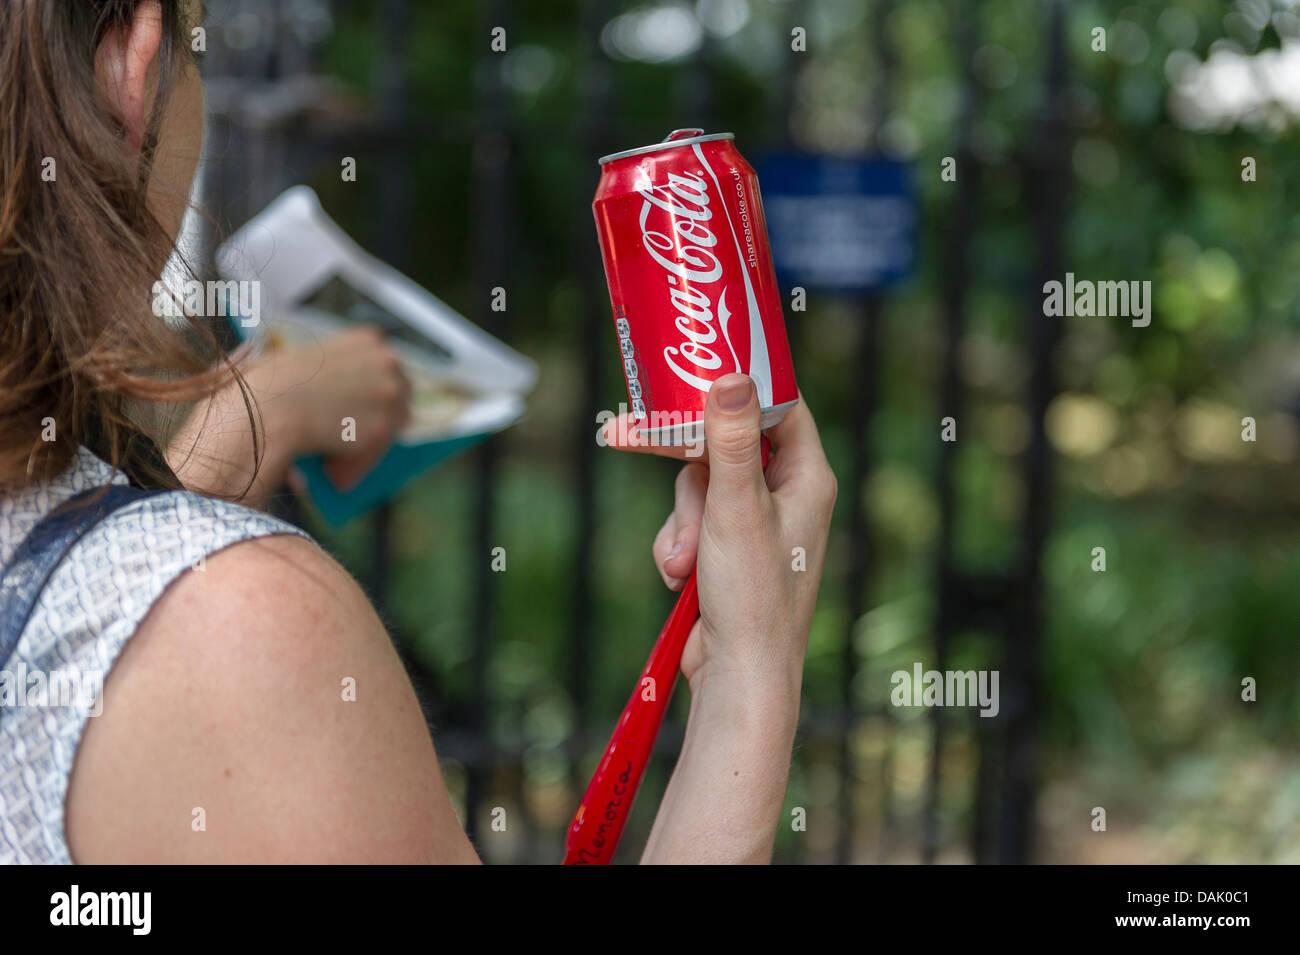 A can of Coca Cola held by a girl. Stock Photo